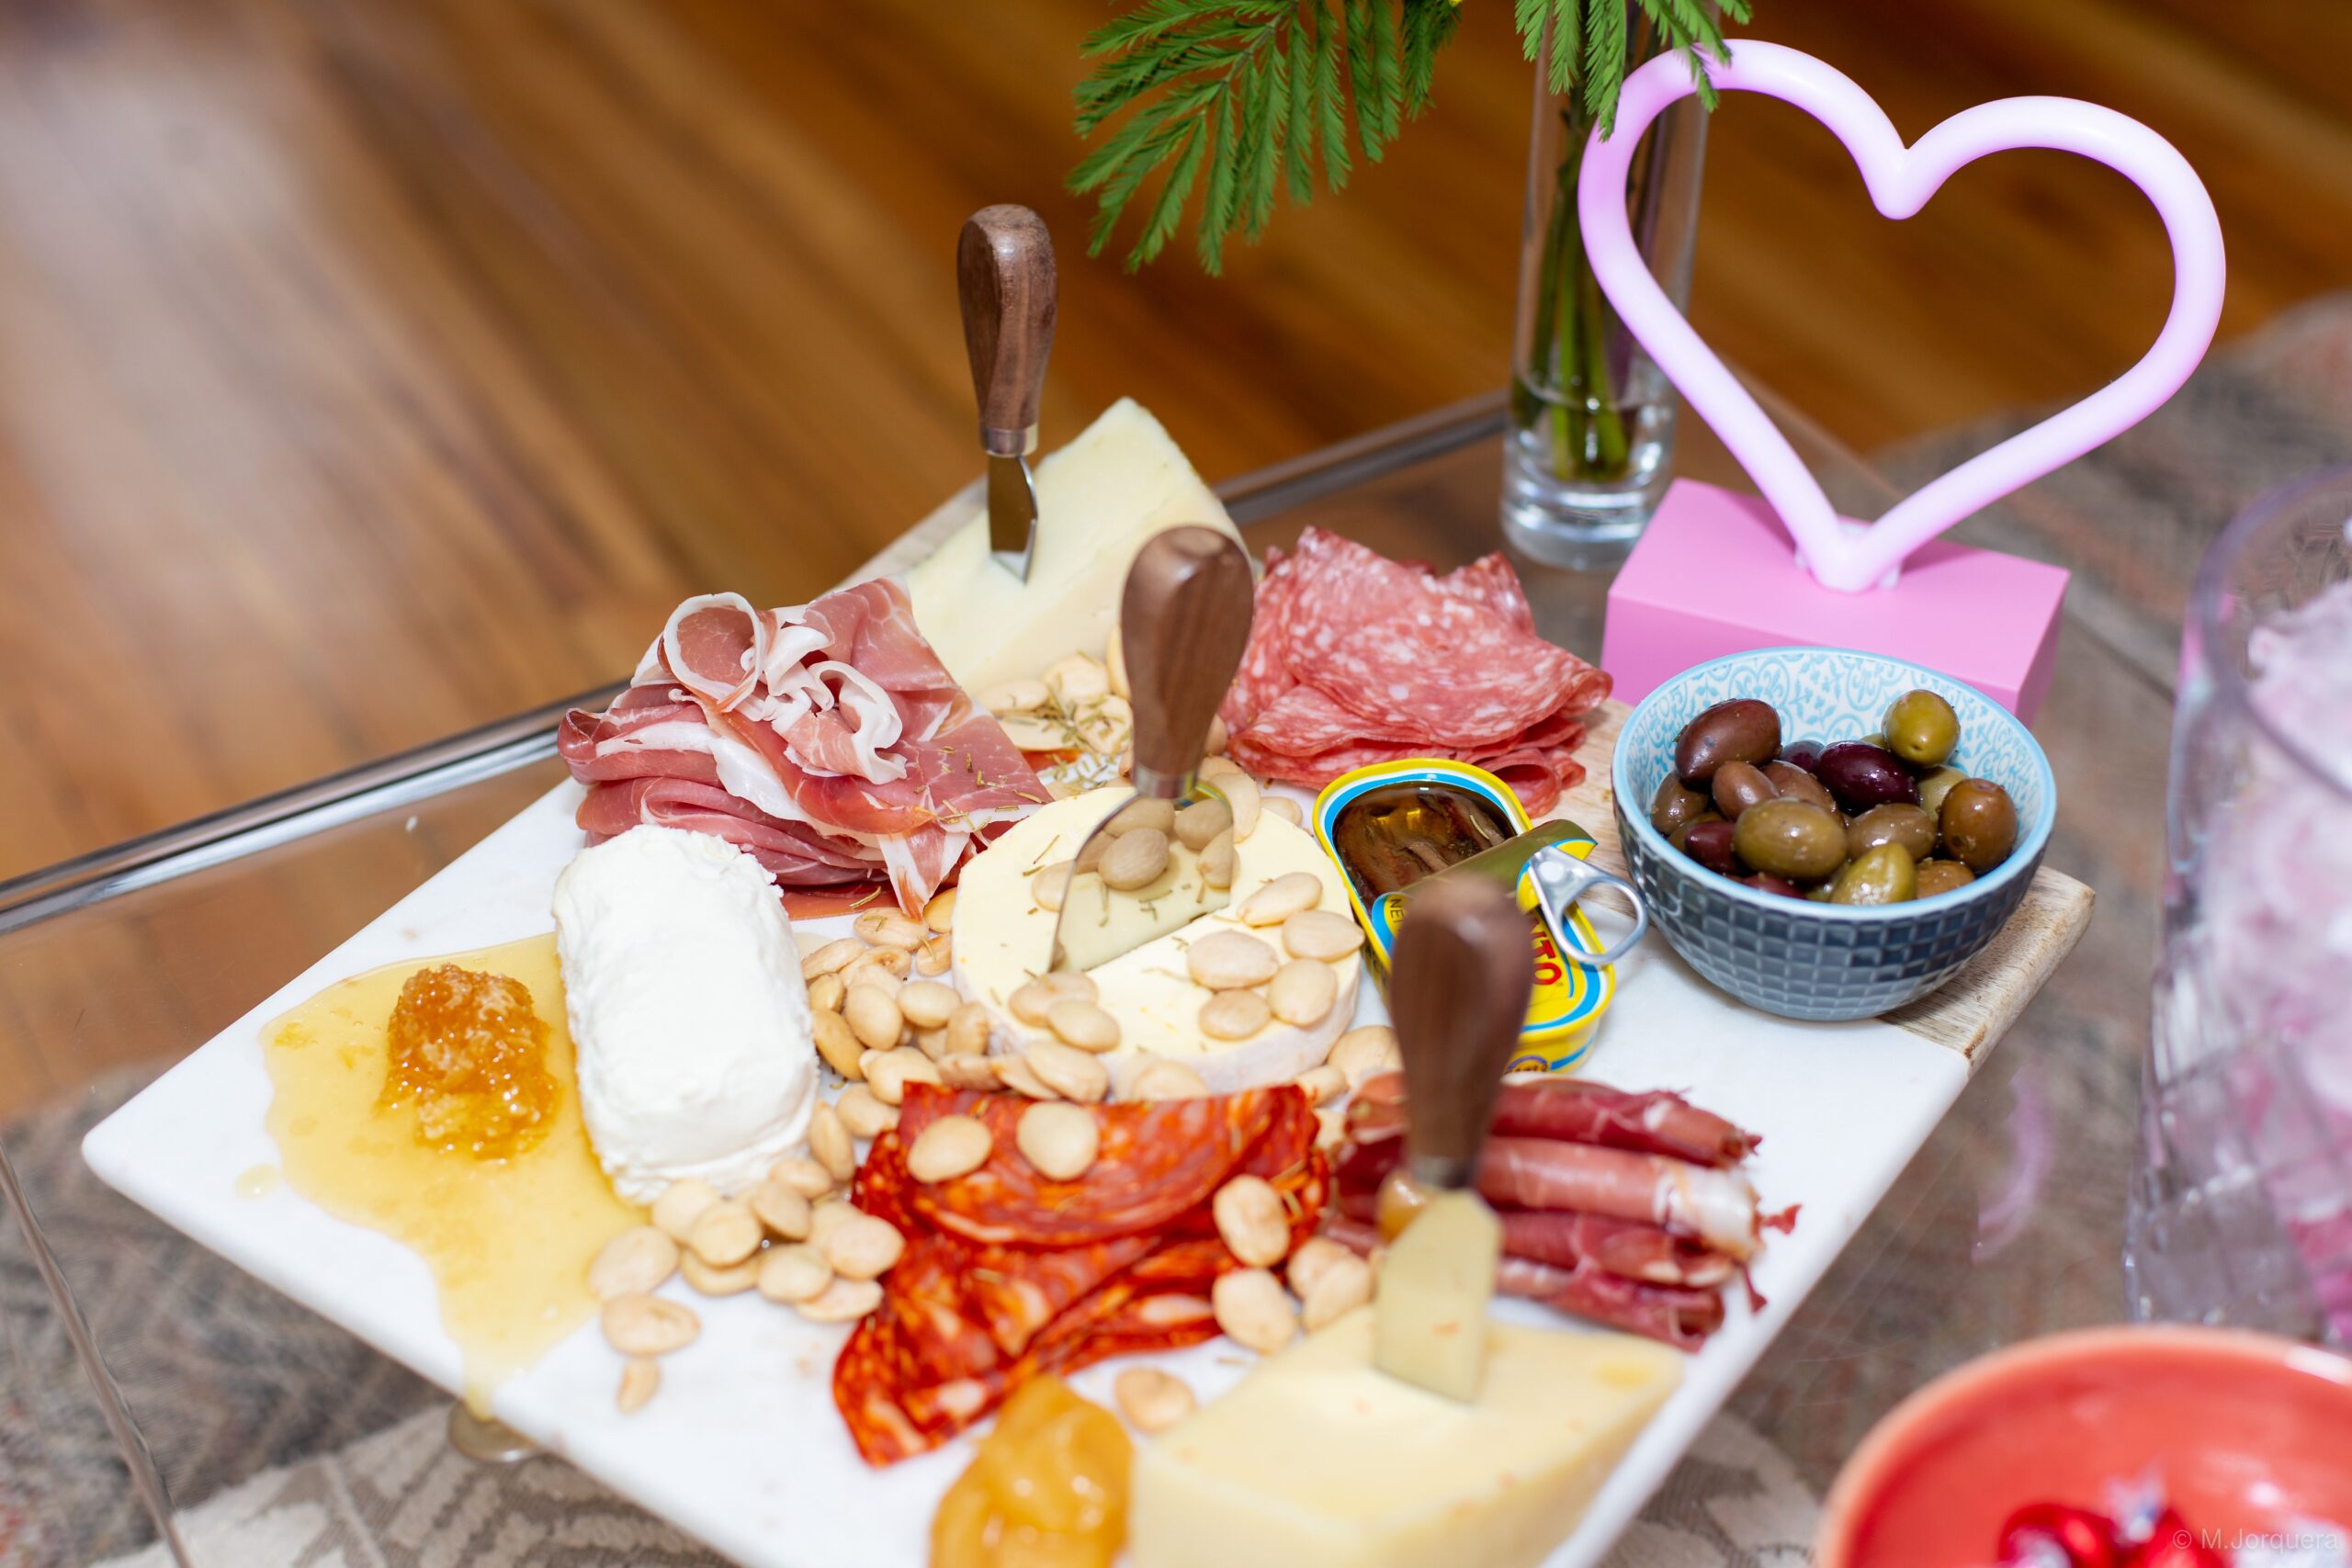 GALENTINE'S DAY PARTY CHEESE BOARD MENU